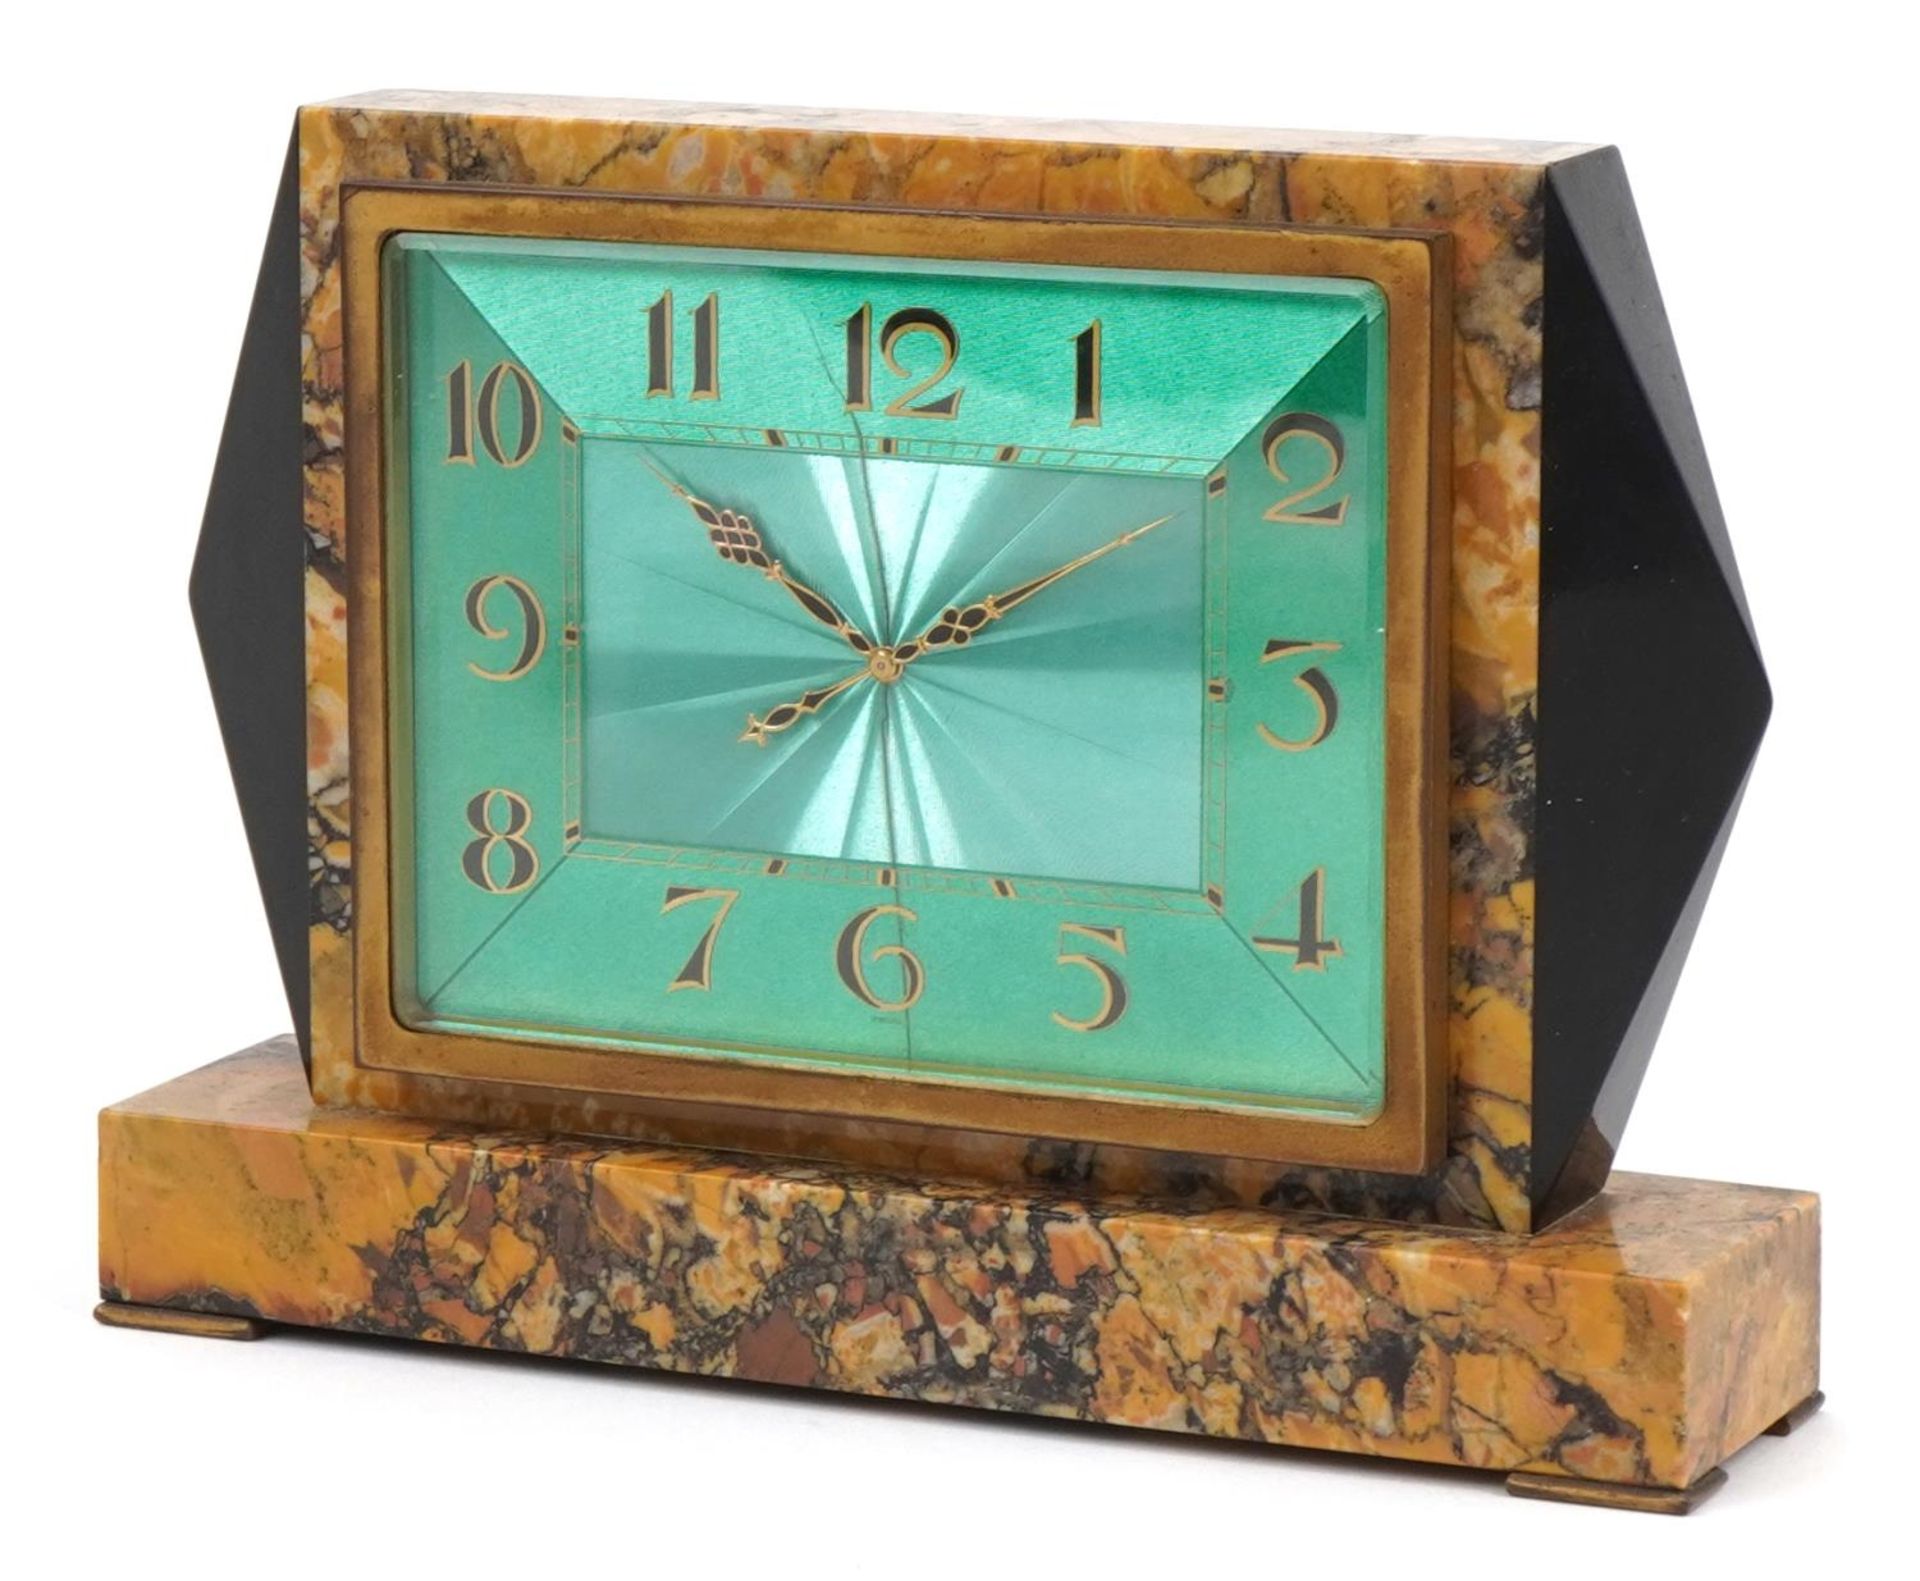 Good Art Deco marble and black slate mantle clock with green engine turned dial having Arabic